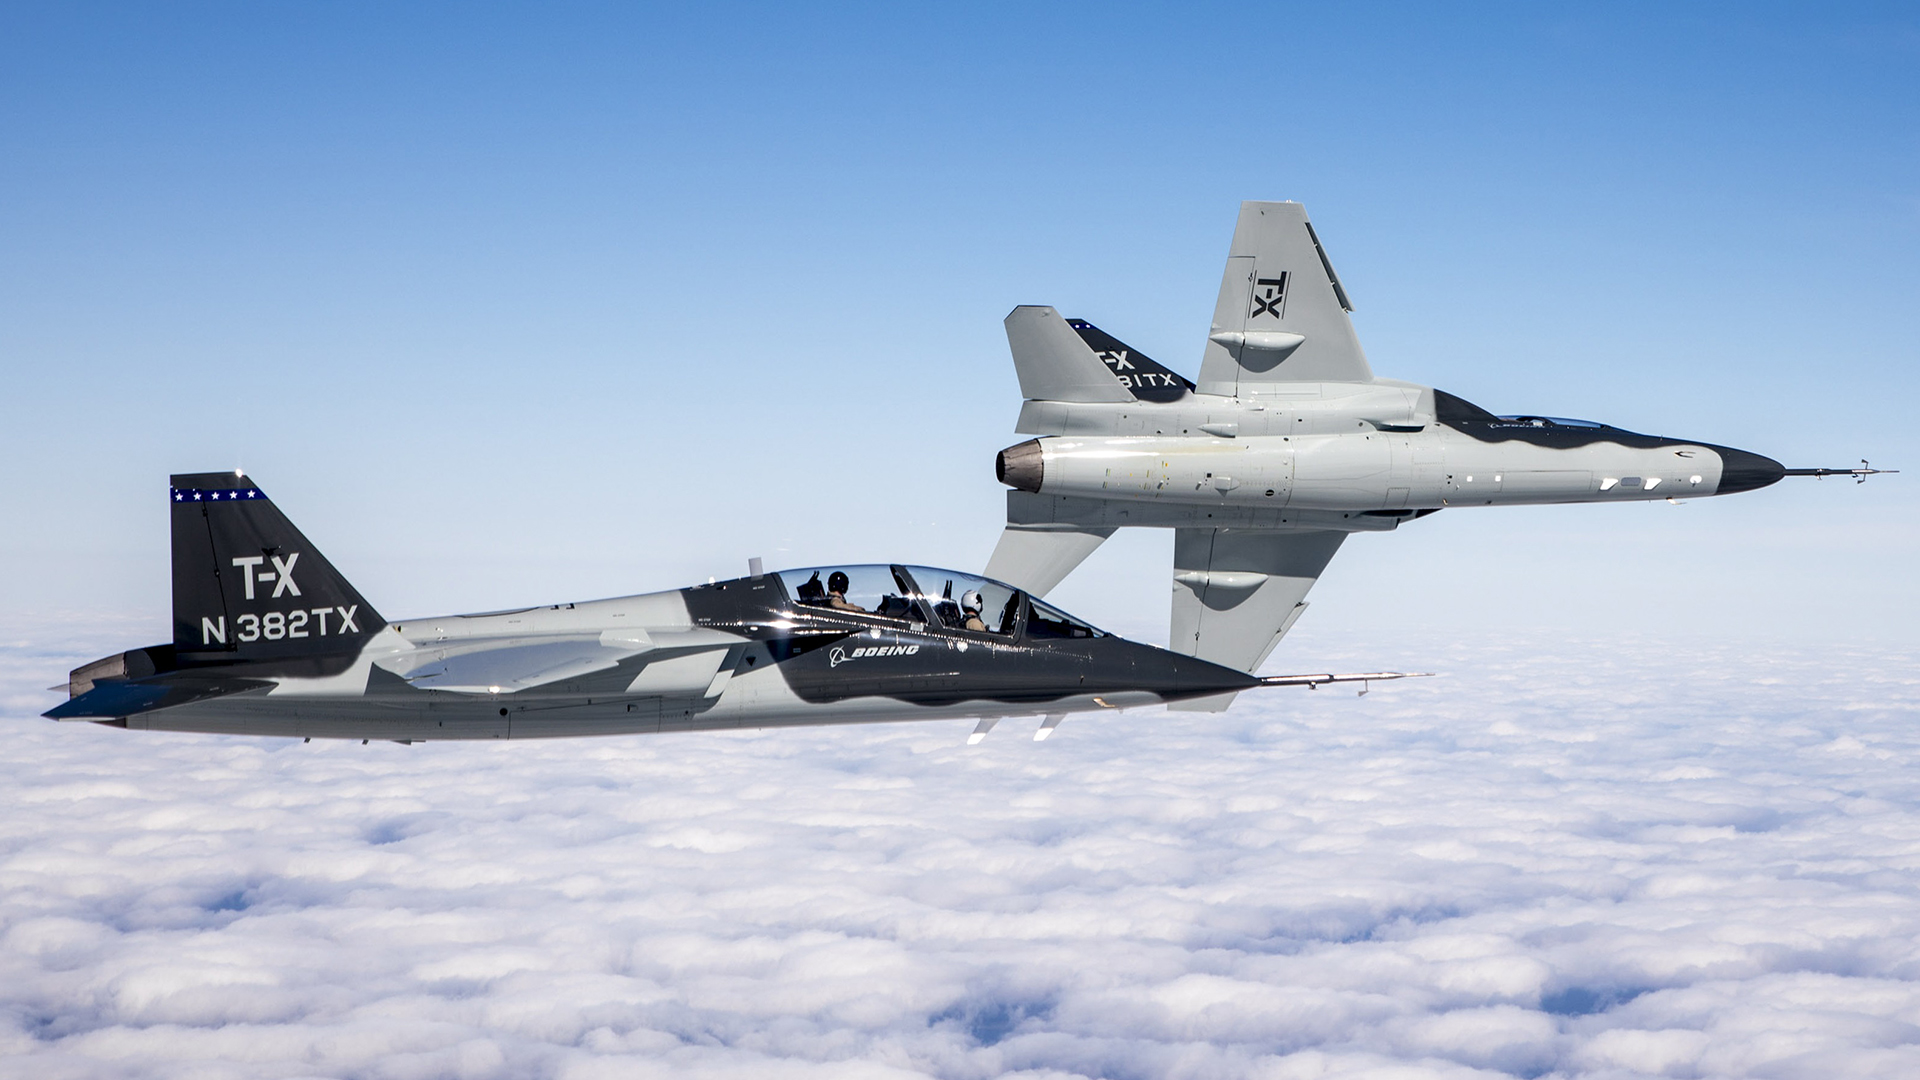 USAF’s T-X Jet Trainer Selection Could Come At Any Moment, Who Do You Think Will Win?